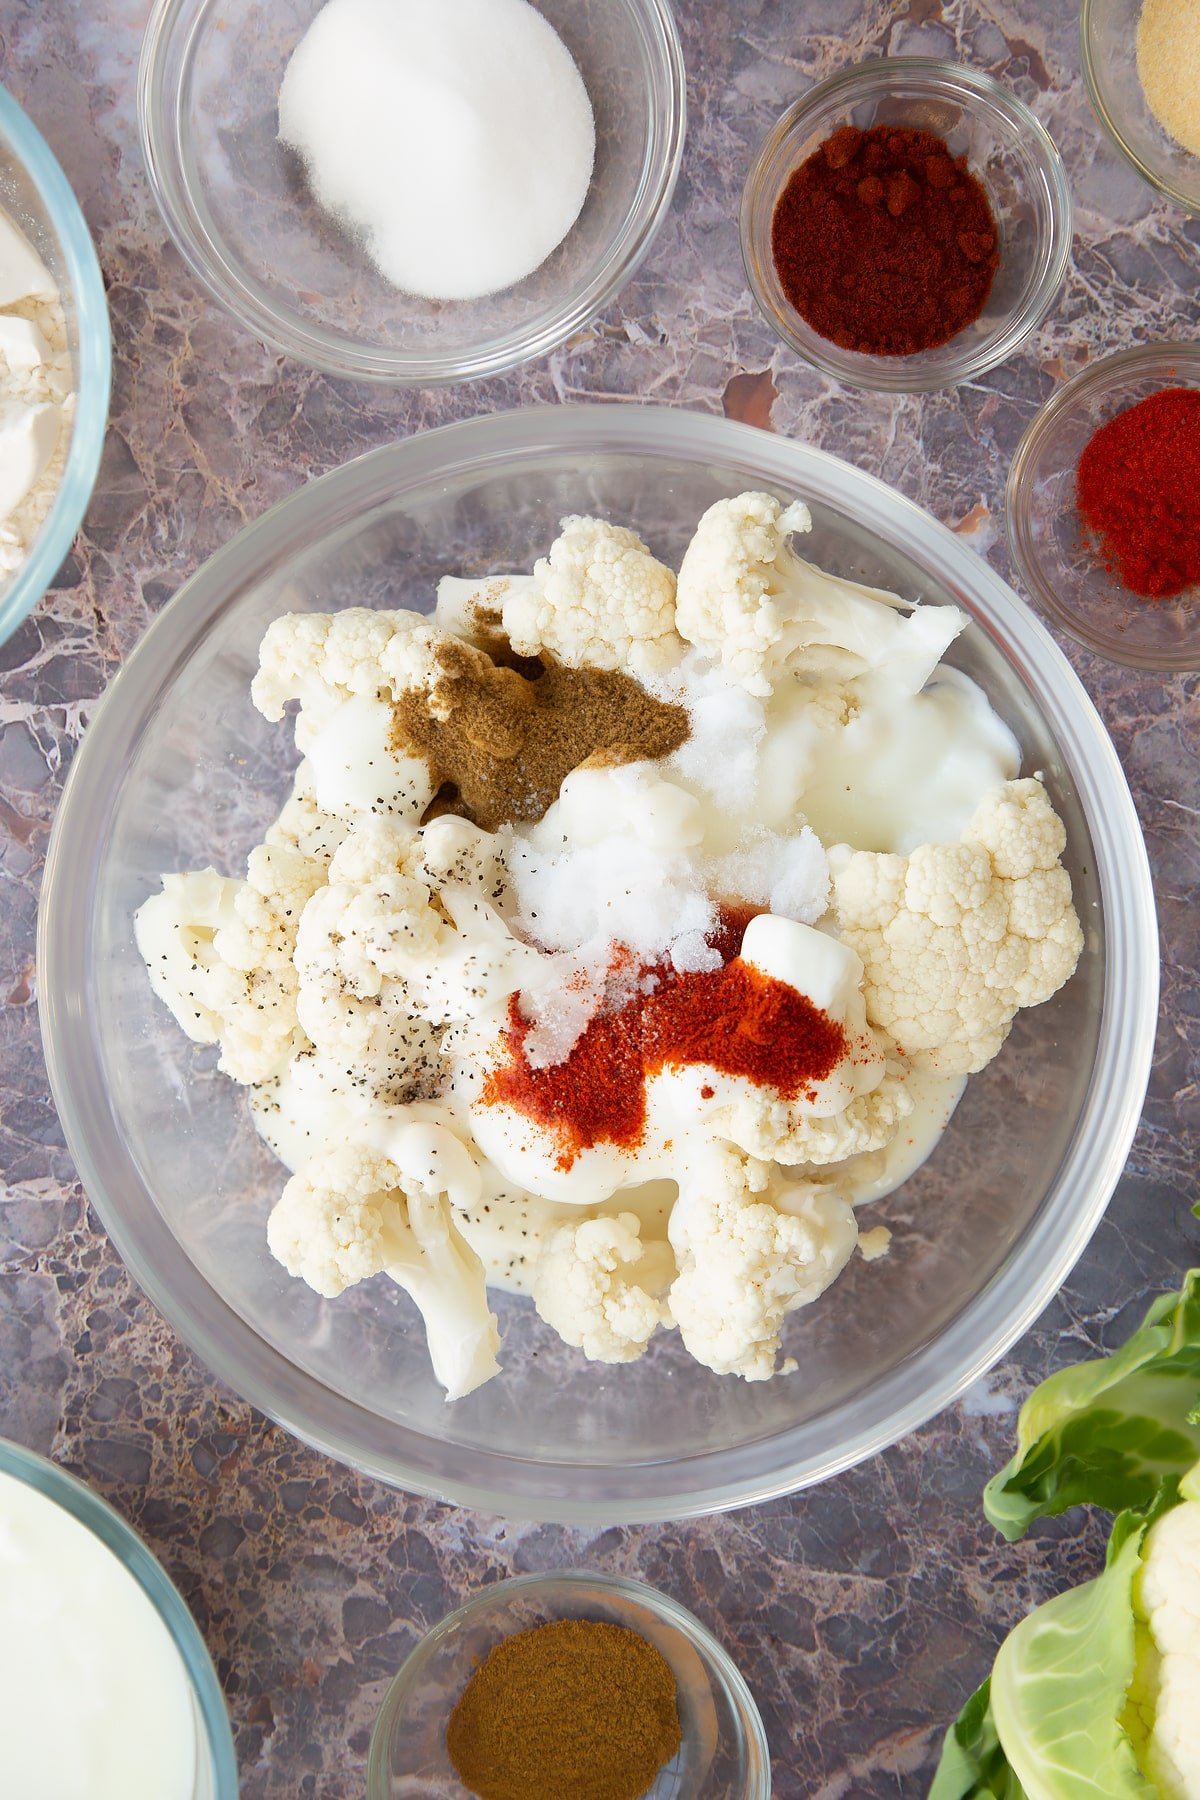 cauliflower florets topped with buttermilk, chilli powder, cumin and sugar in a clear bowl.